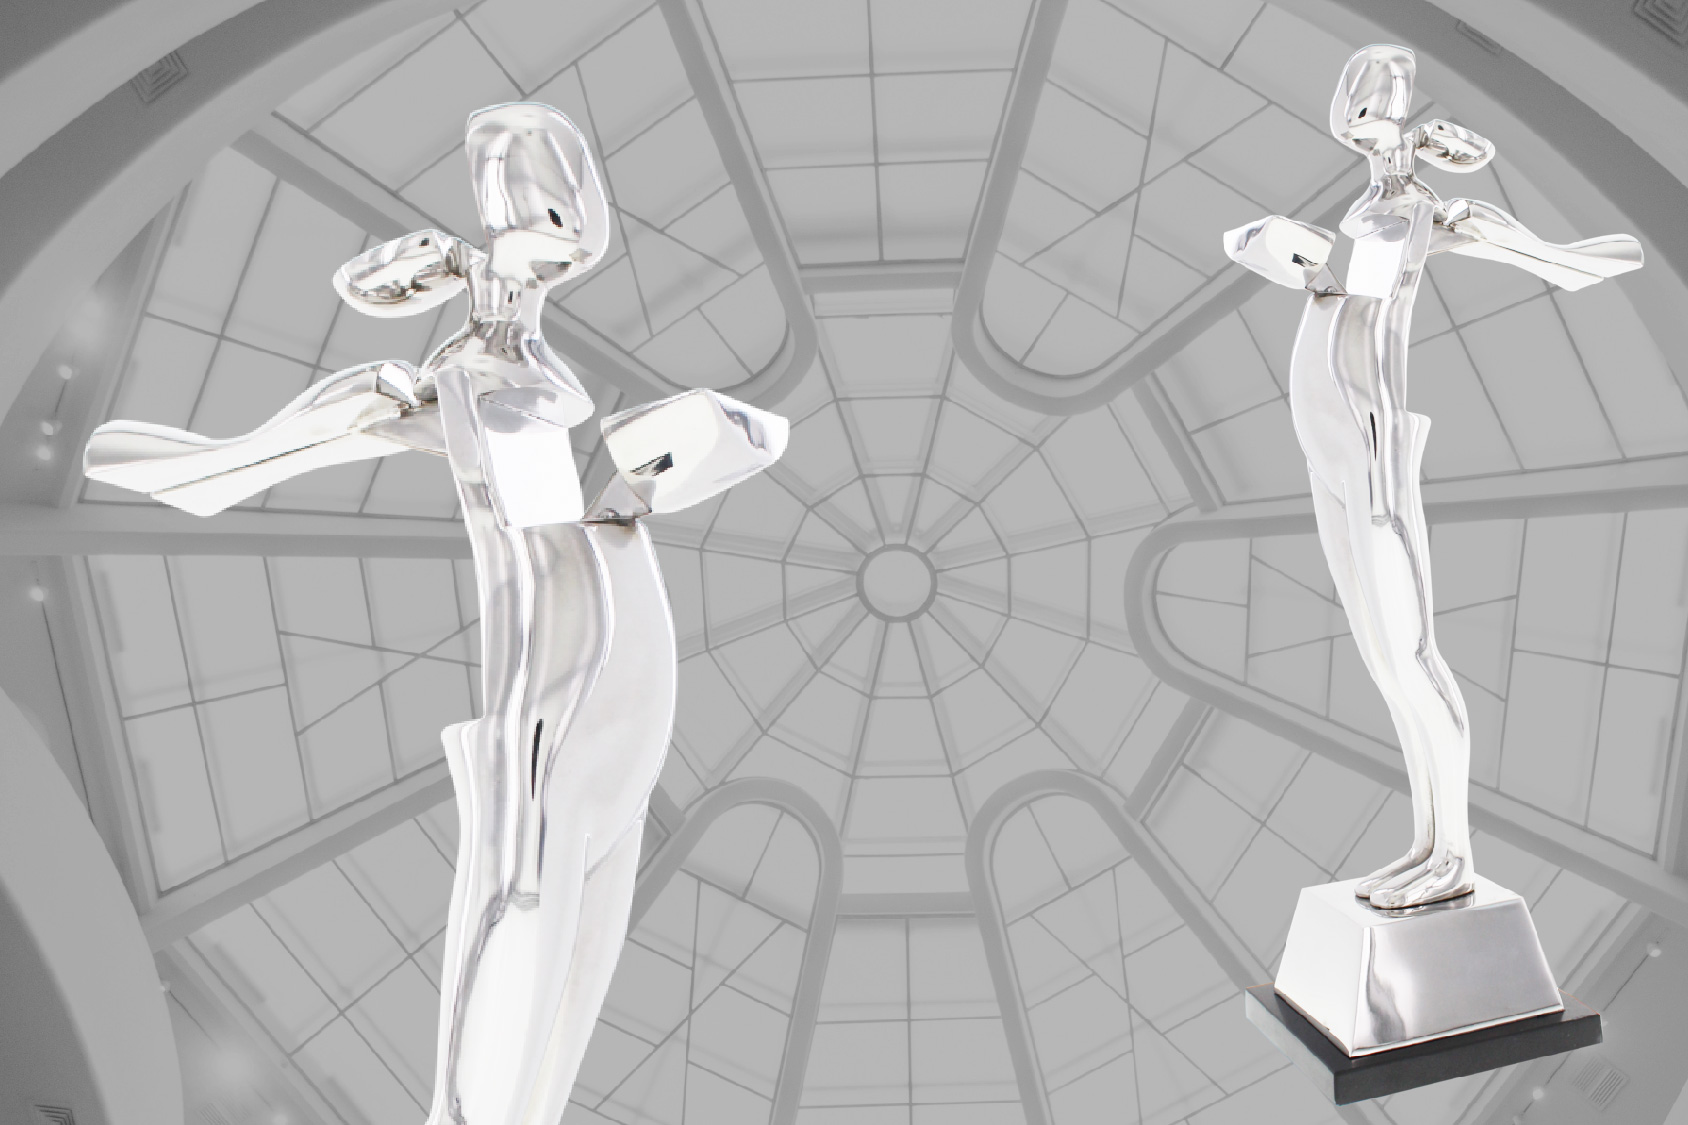 The CFDA Fashion Awards trophy, a licensed reproduction of an Ernest Trova sculpture